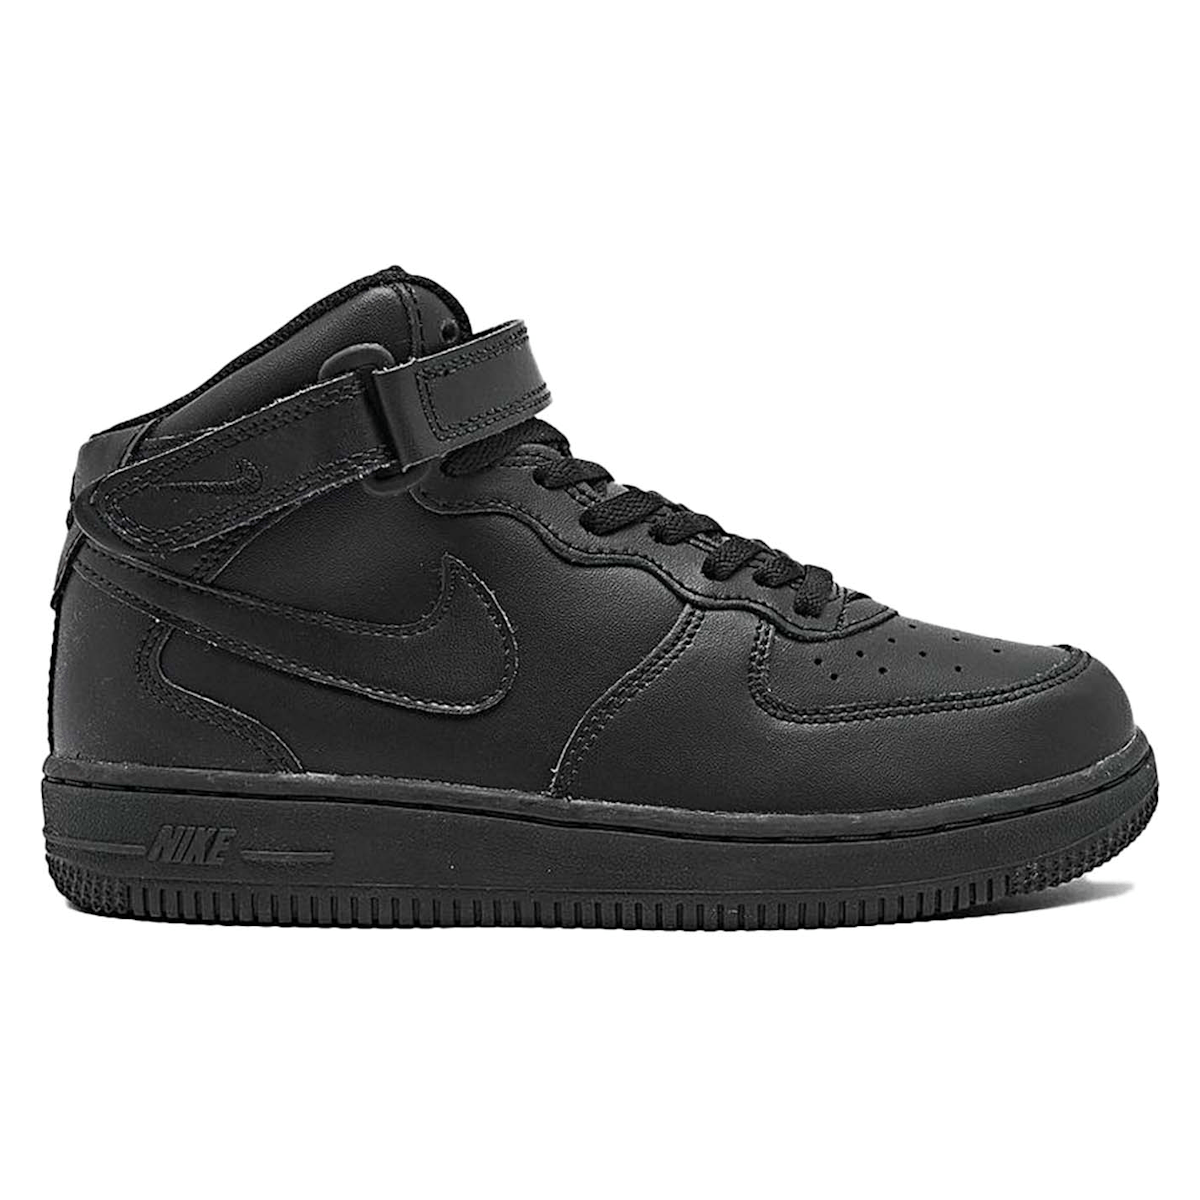 Nike Air Force 1 Mid LE Black (PS)